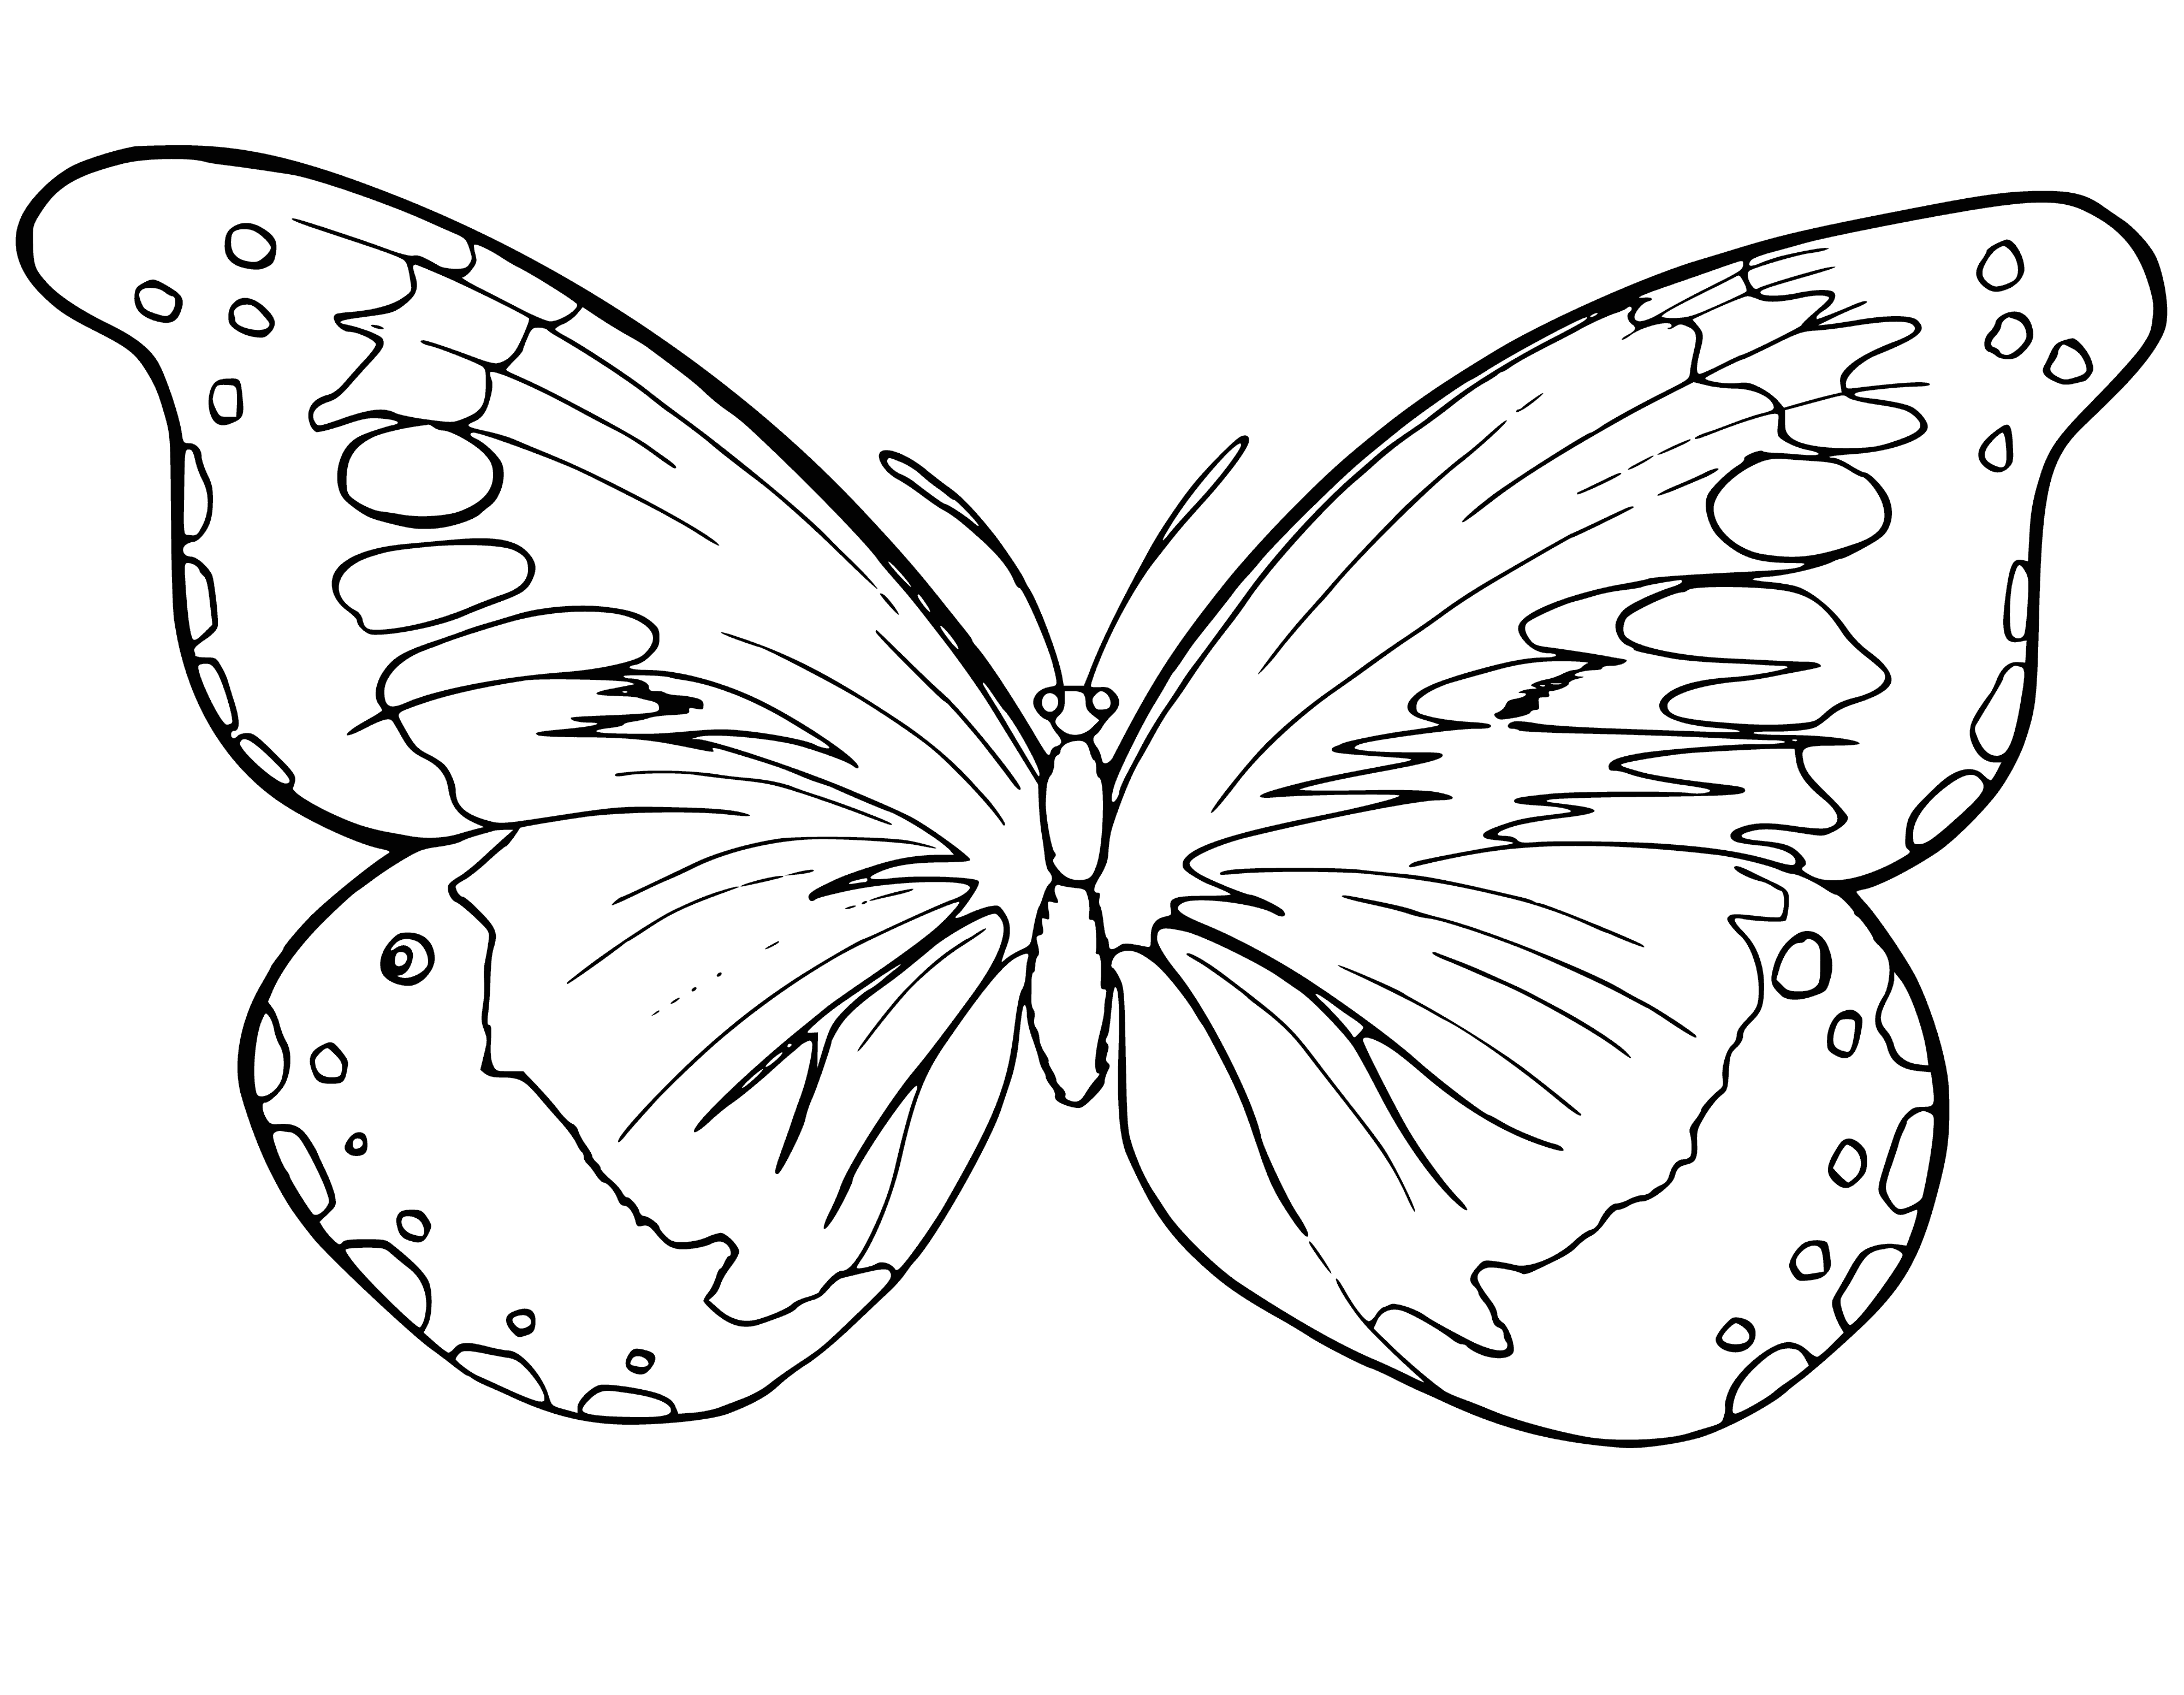 coloring page: Butterflies flying in the sky of different colors, some flapping their wings & others gliding in front of a white background. #beauty